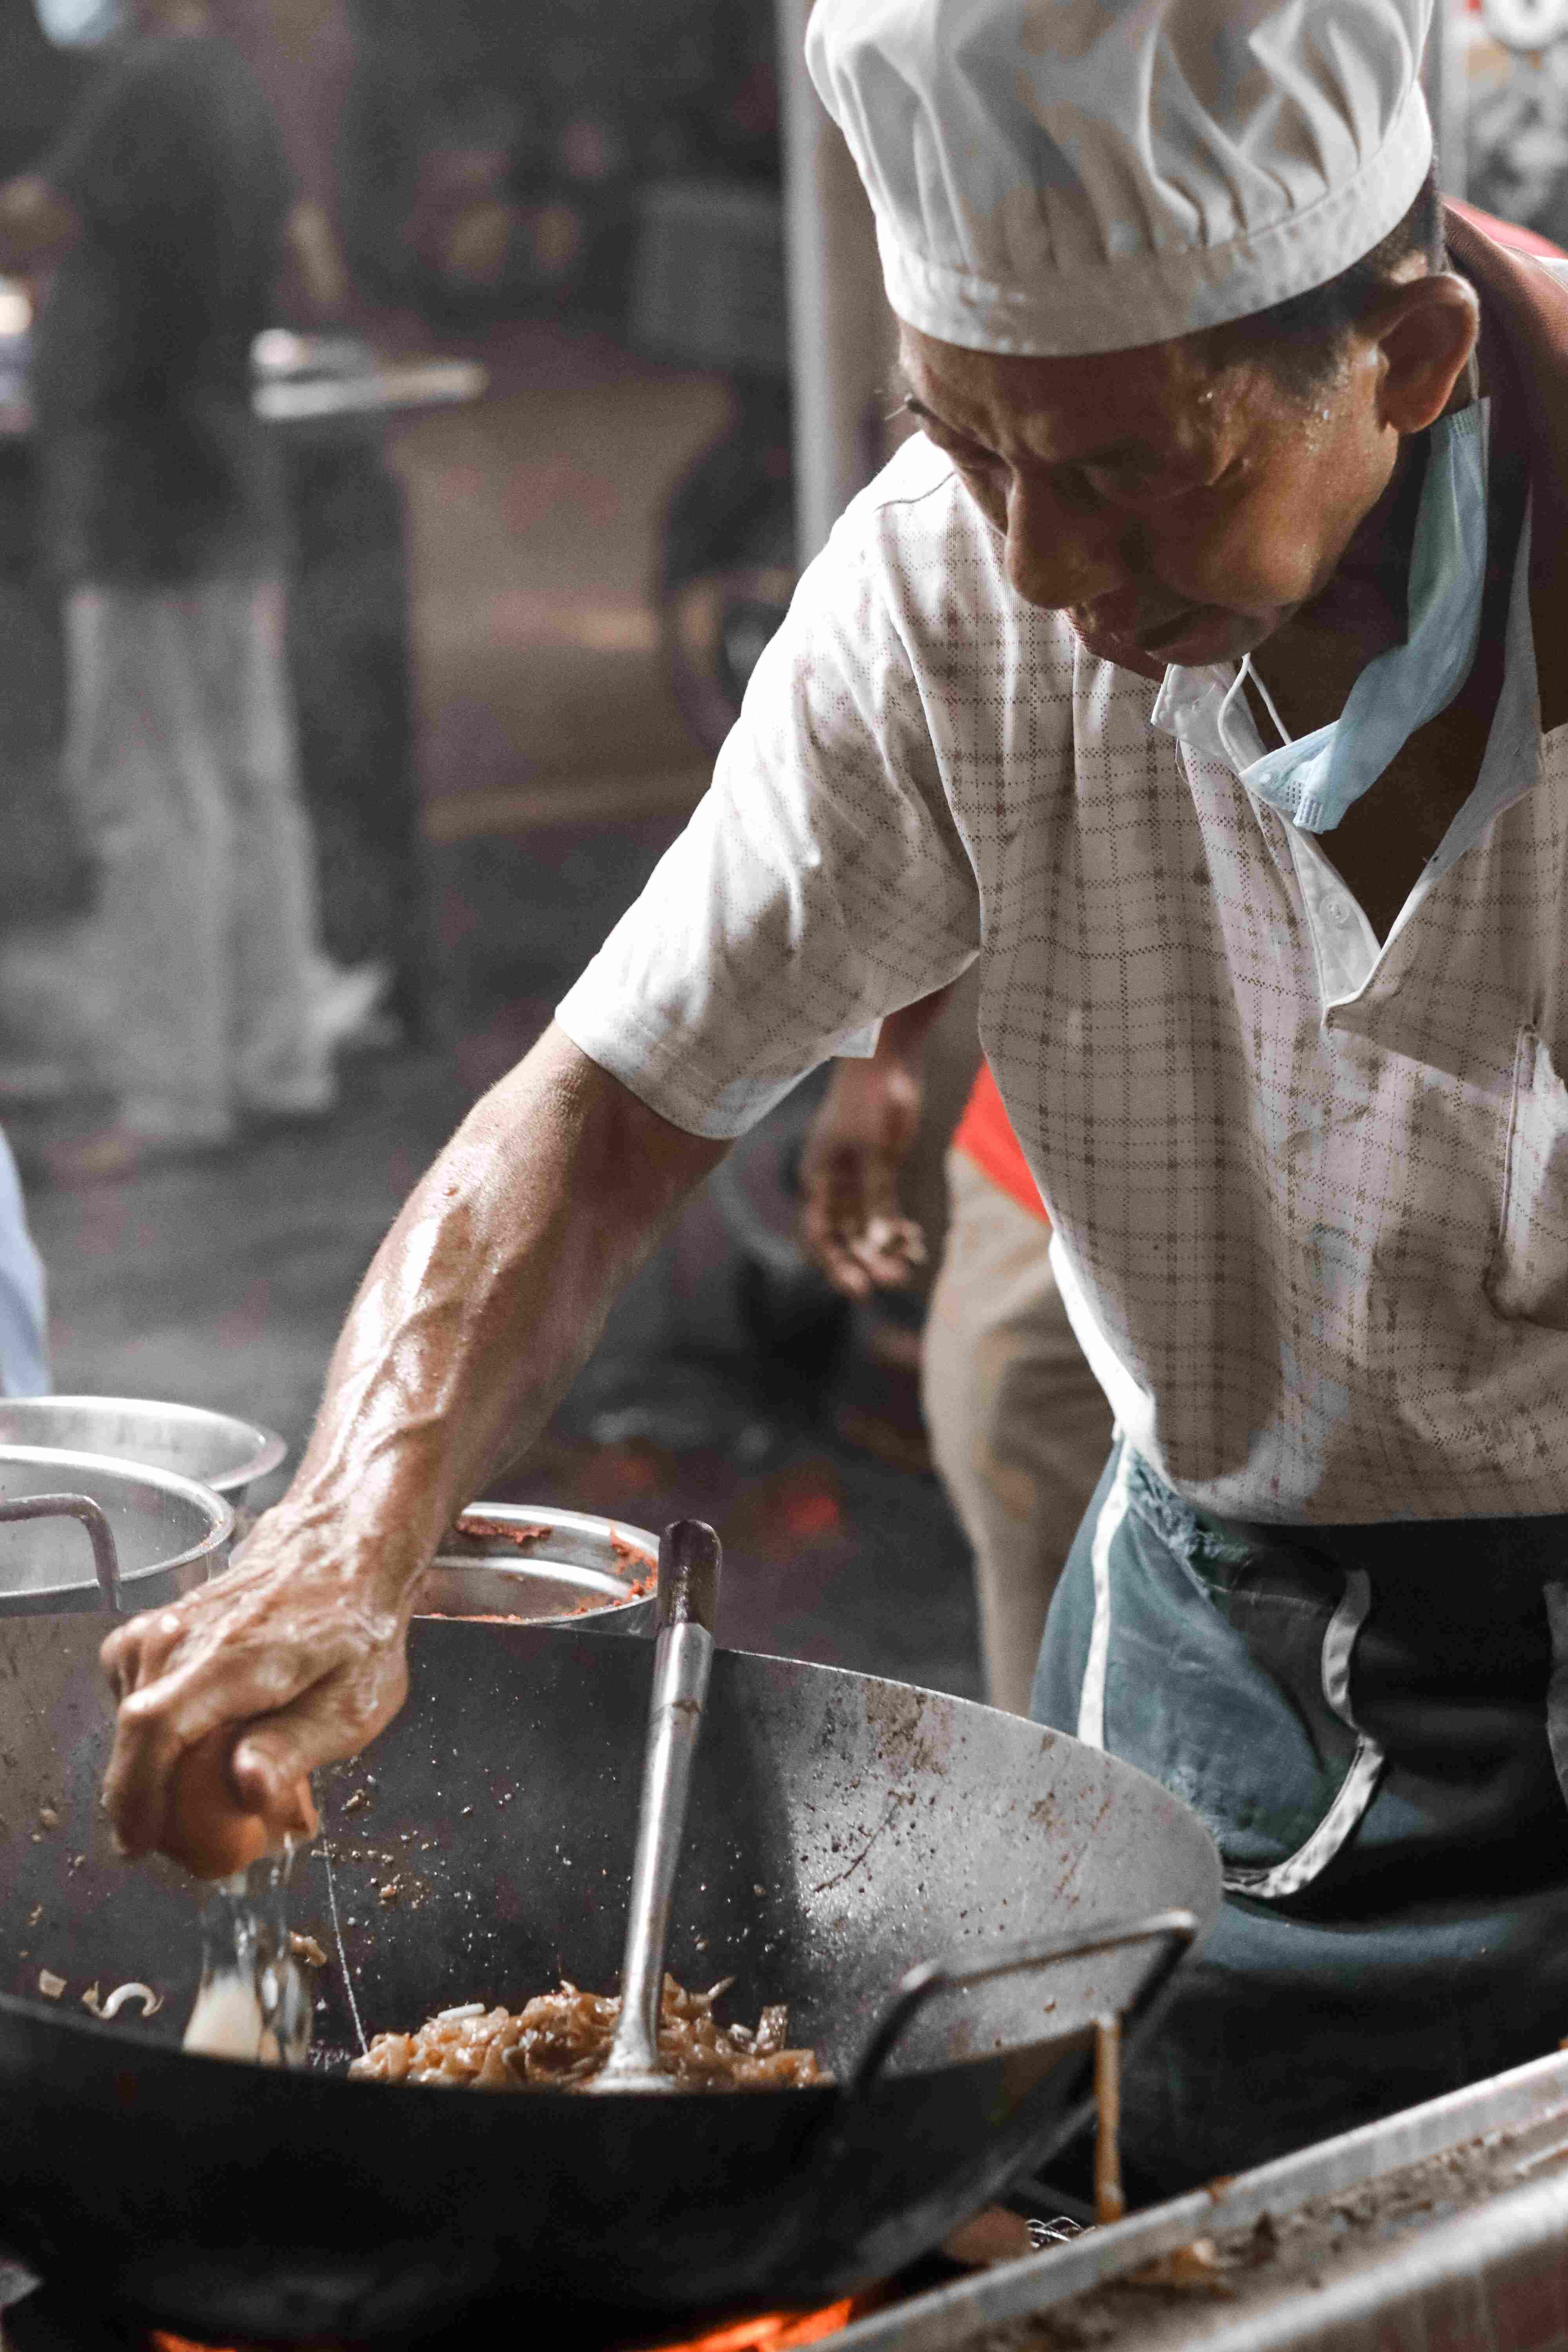 Man cooking in Penang, by Mark Chan on Unsplash